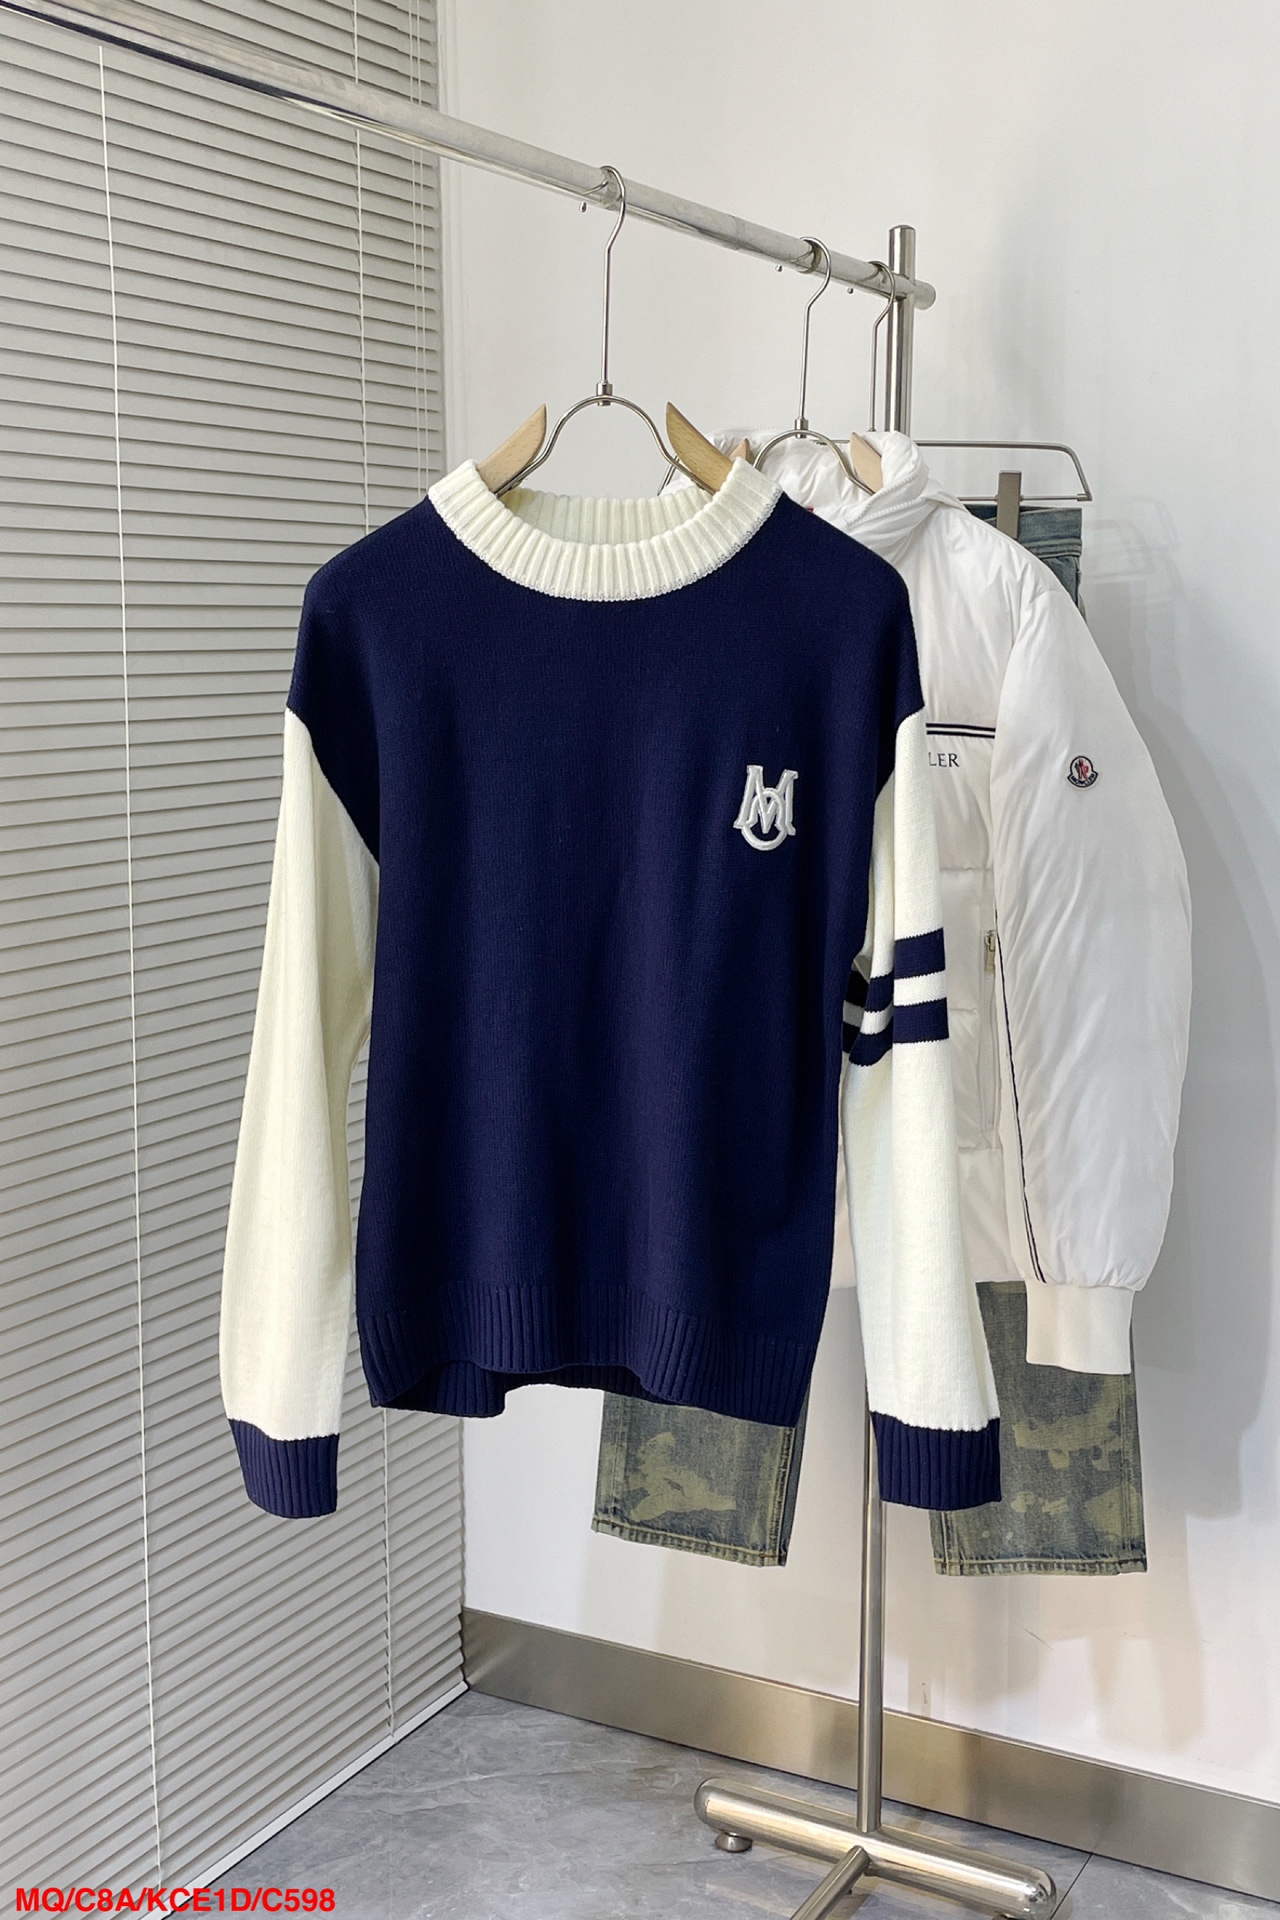 Alexander McQueen Clothing Knit Sweater Sweatshirts Knitting Fall/Winter Collection Fashion